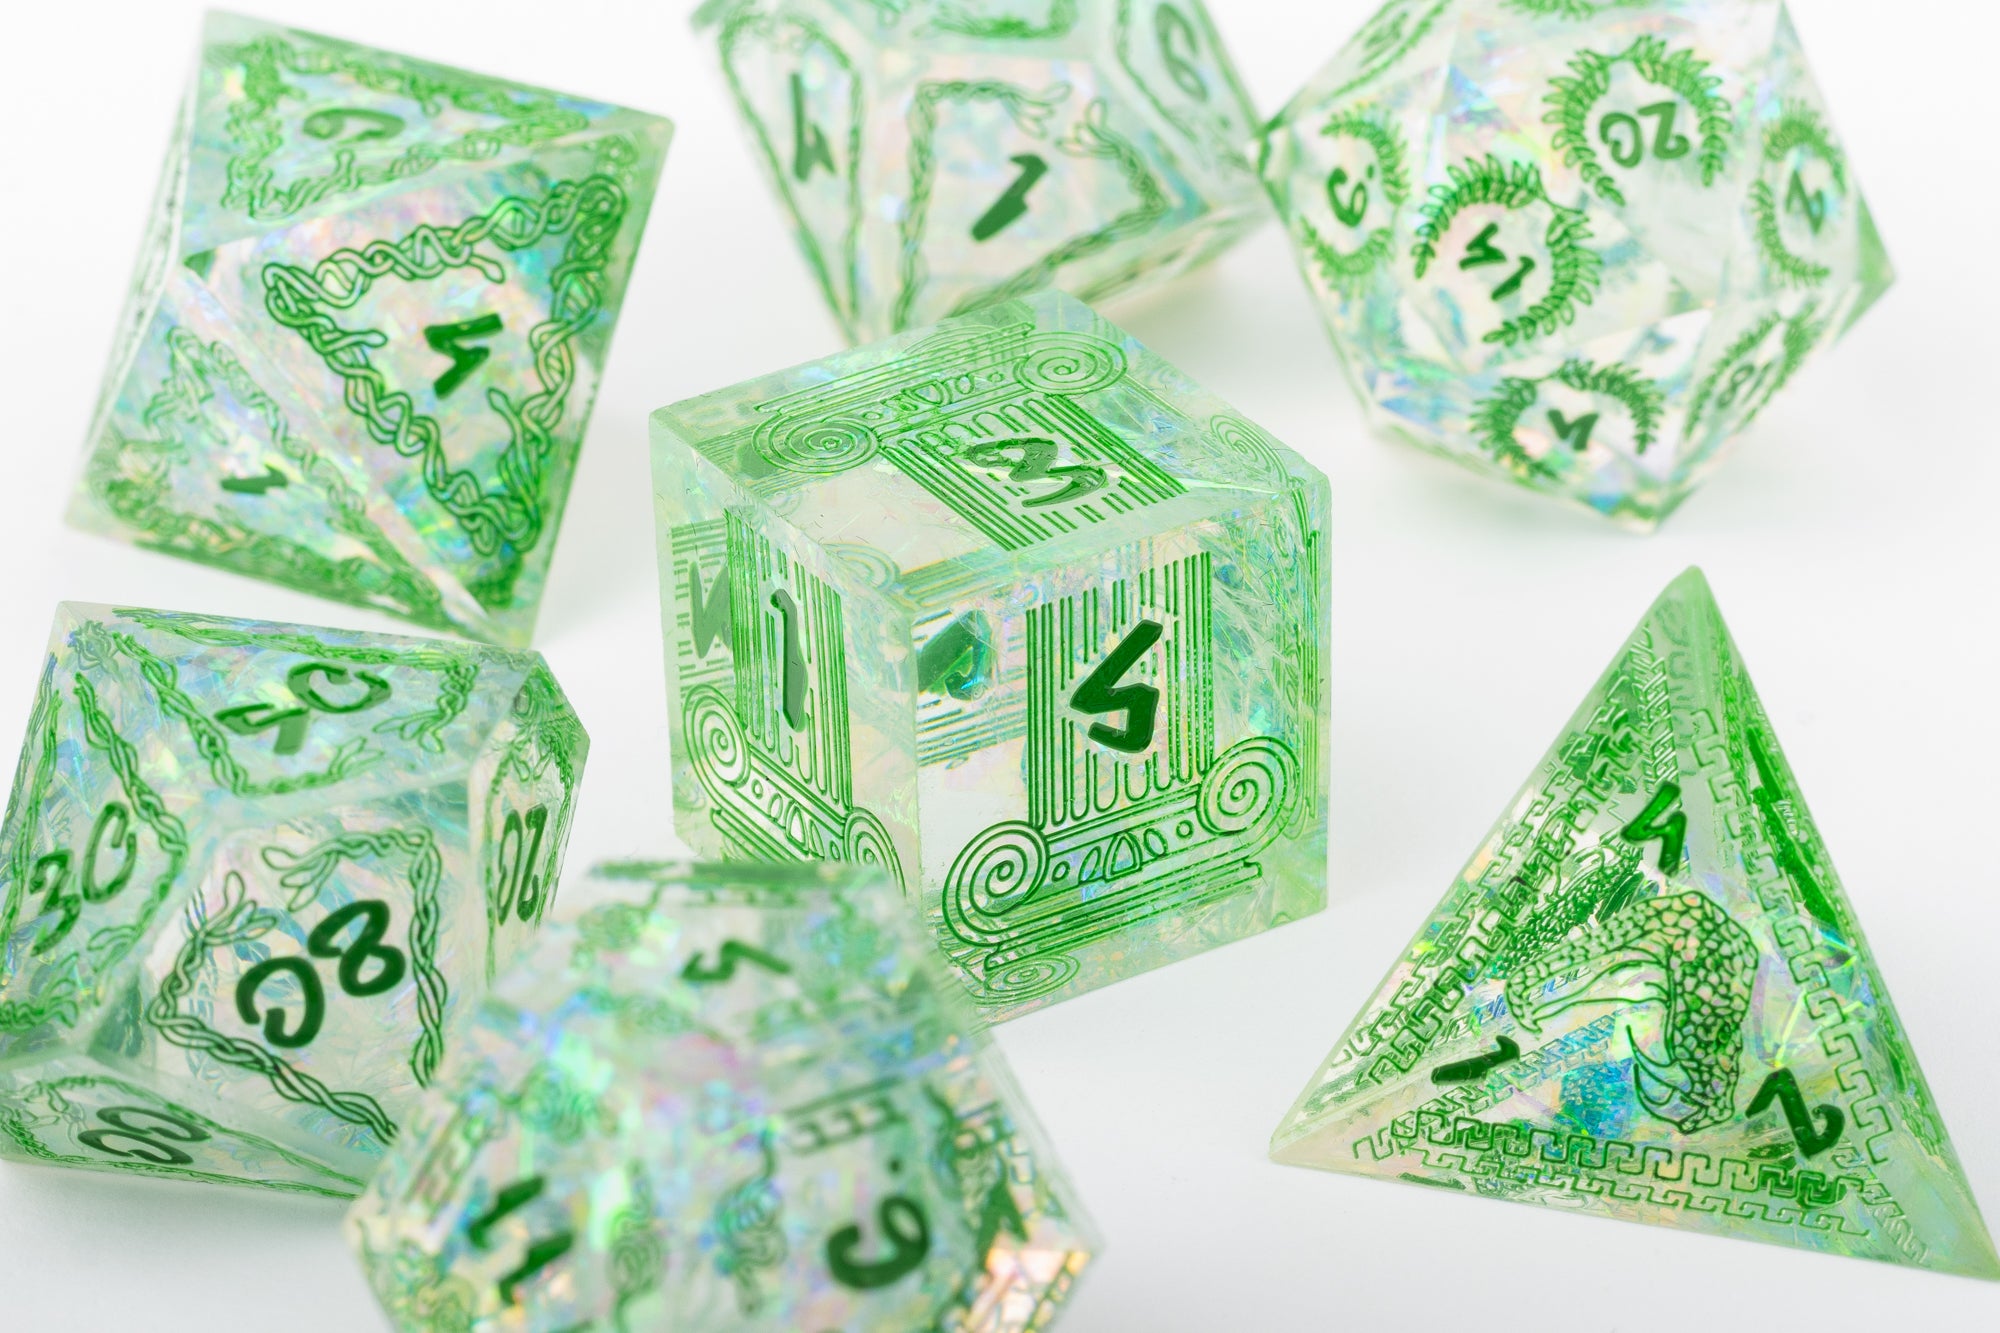 Medusa Green Ancient Greece Inspired Polyhedral Dice Set